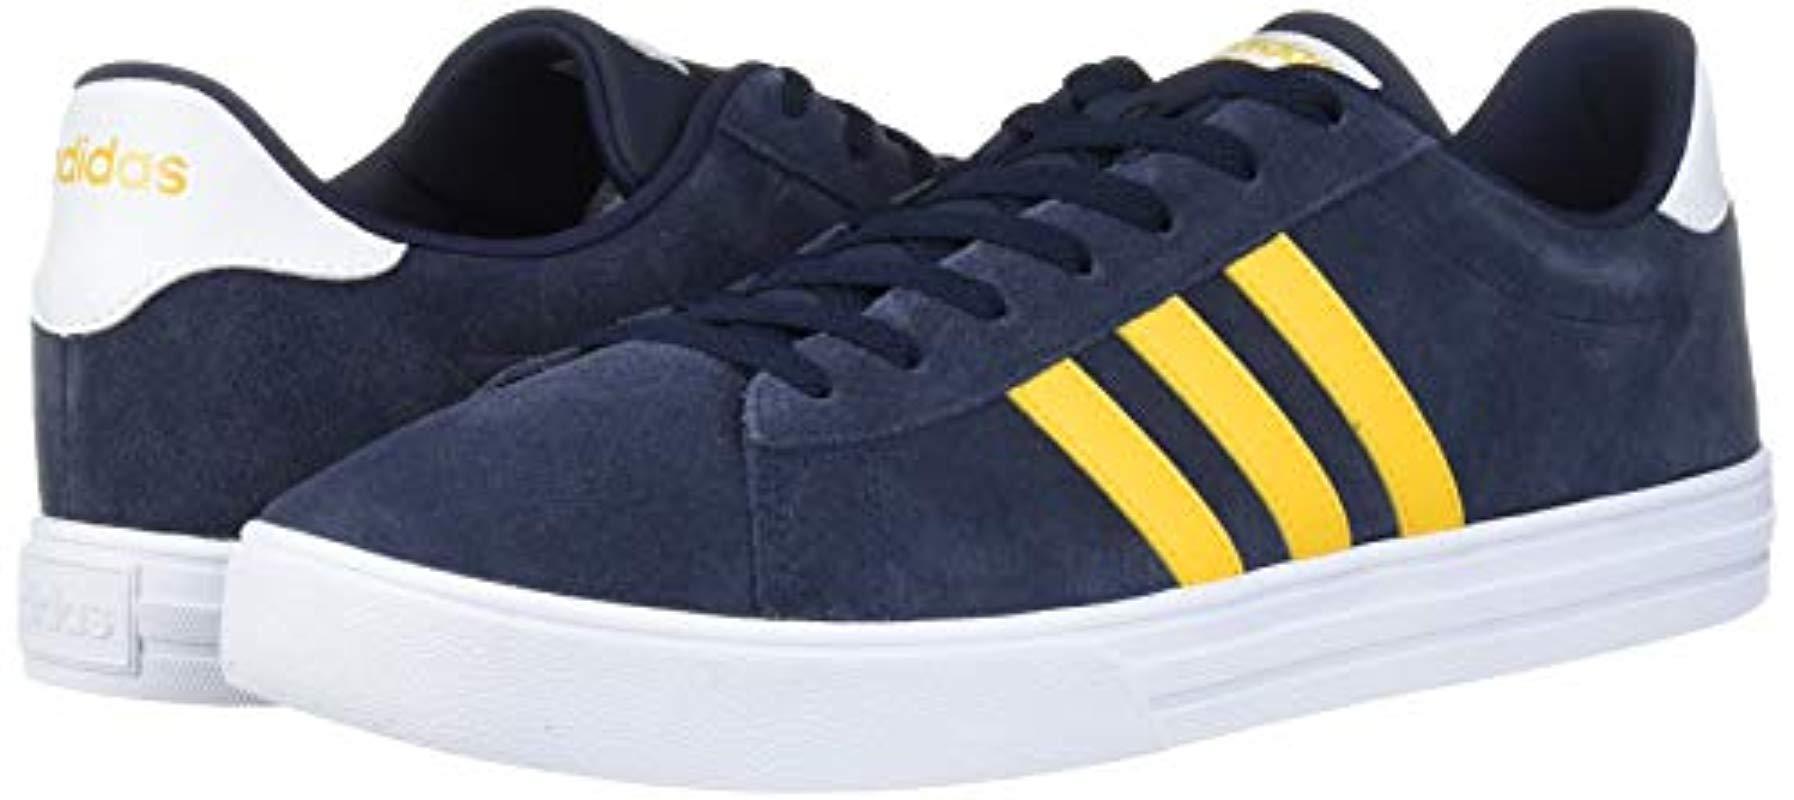 adidas daily 2.0 men's suede sneakers